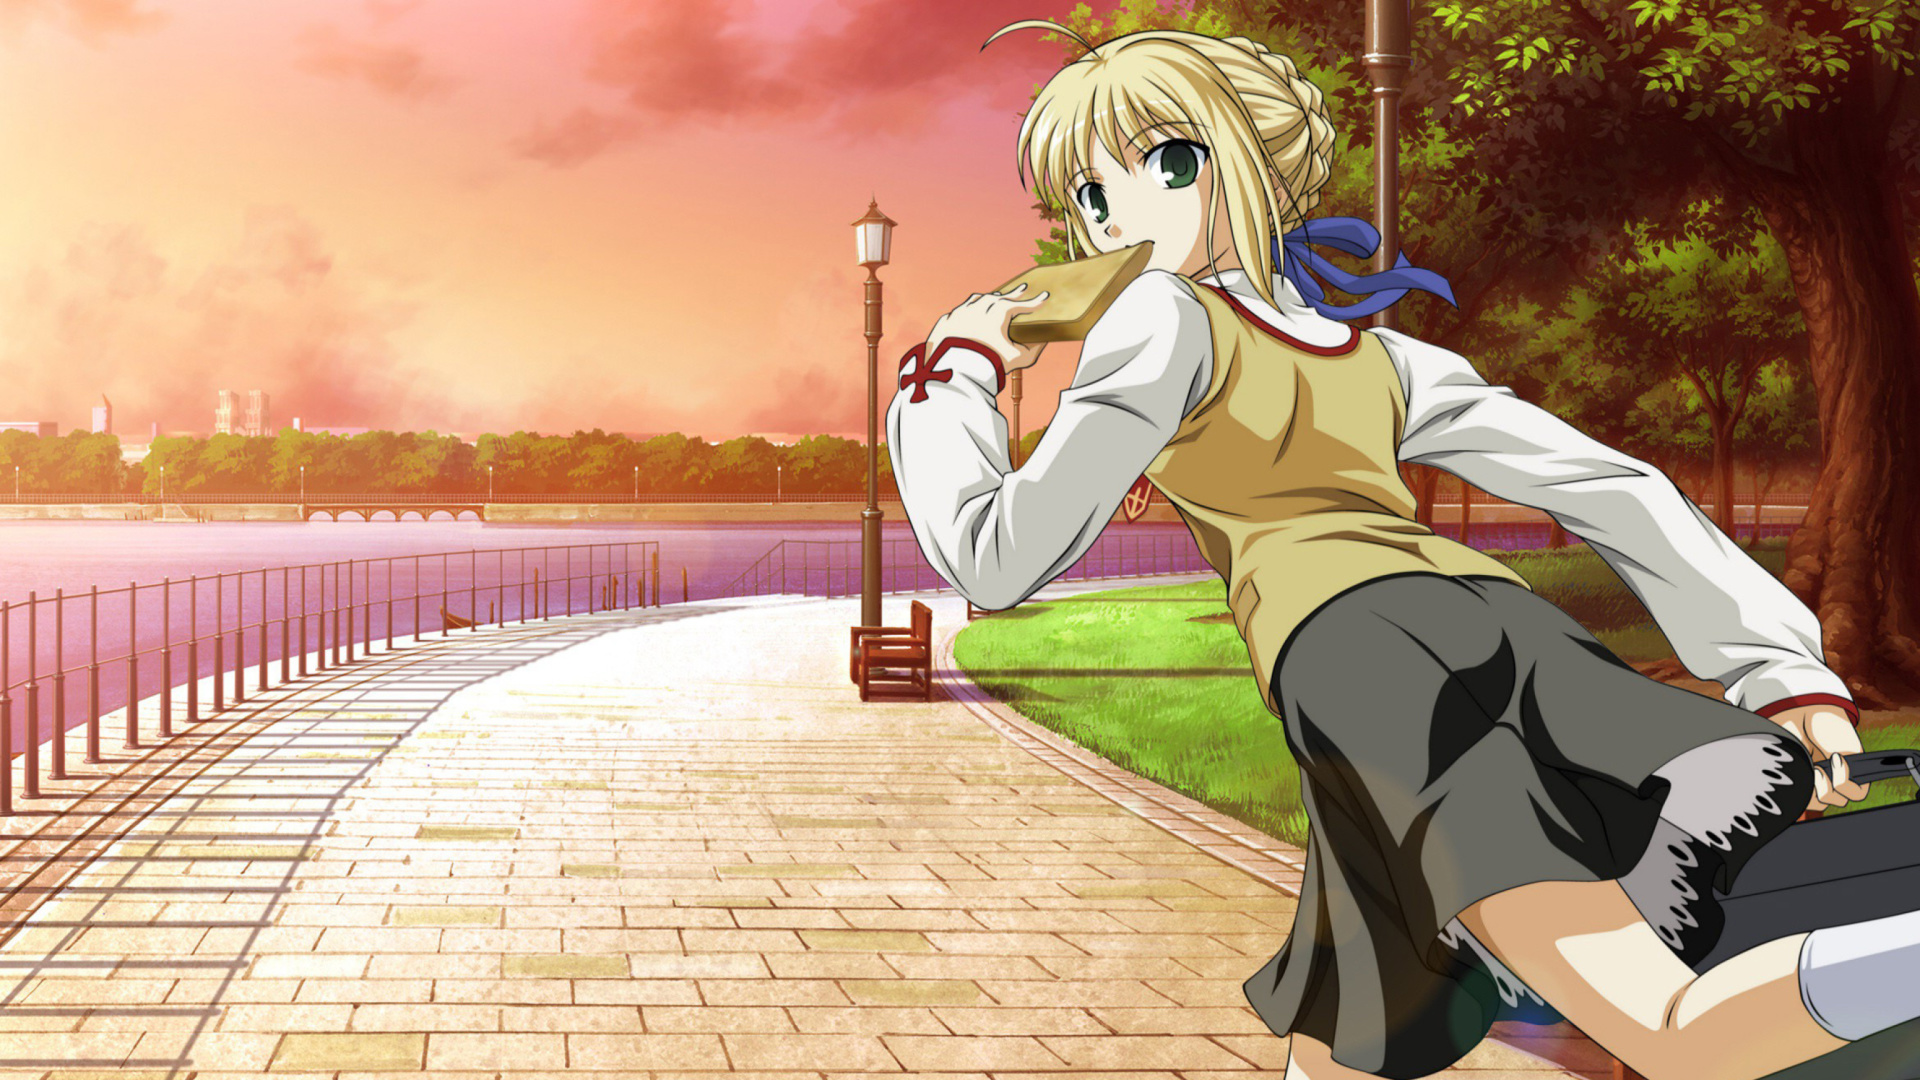 Fate stay night Saber Anime wallpaper 1920x1080